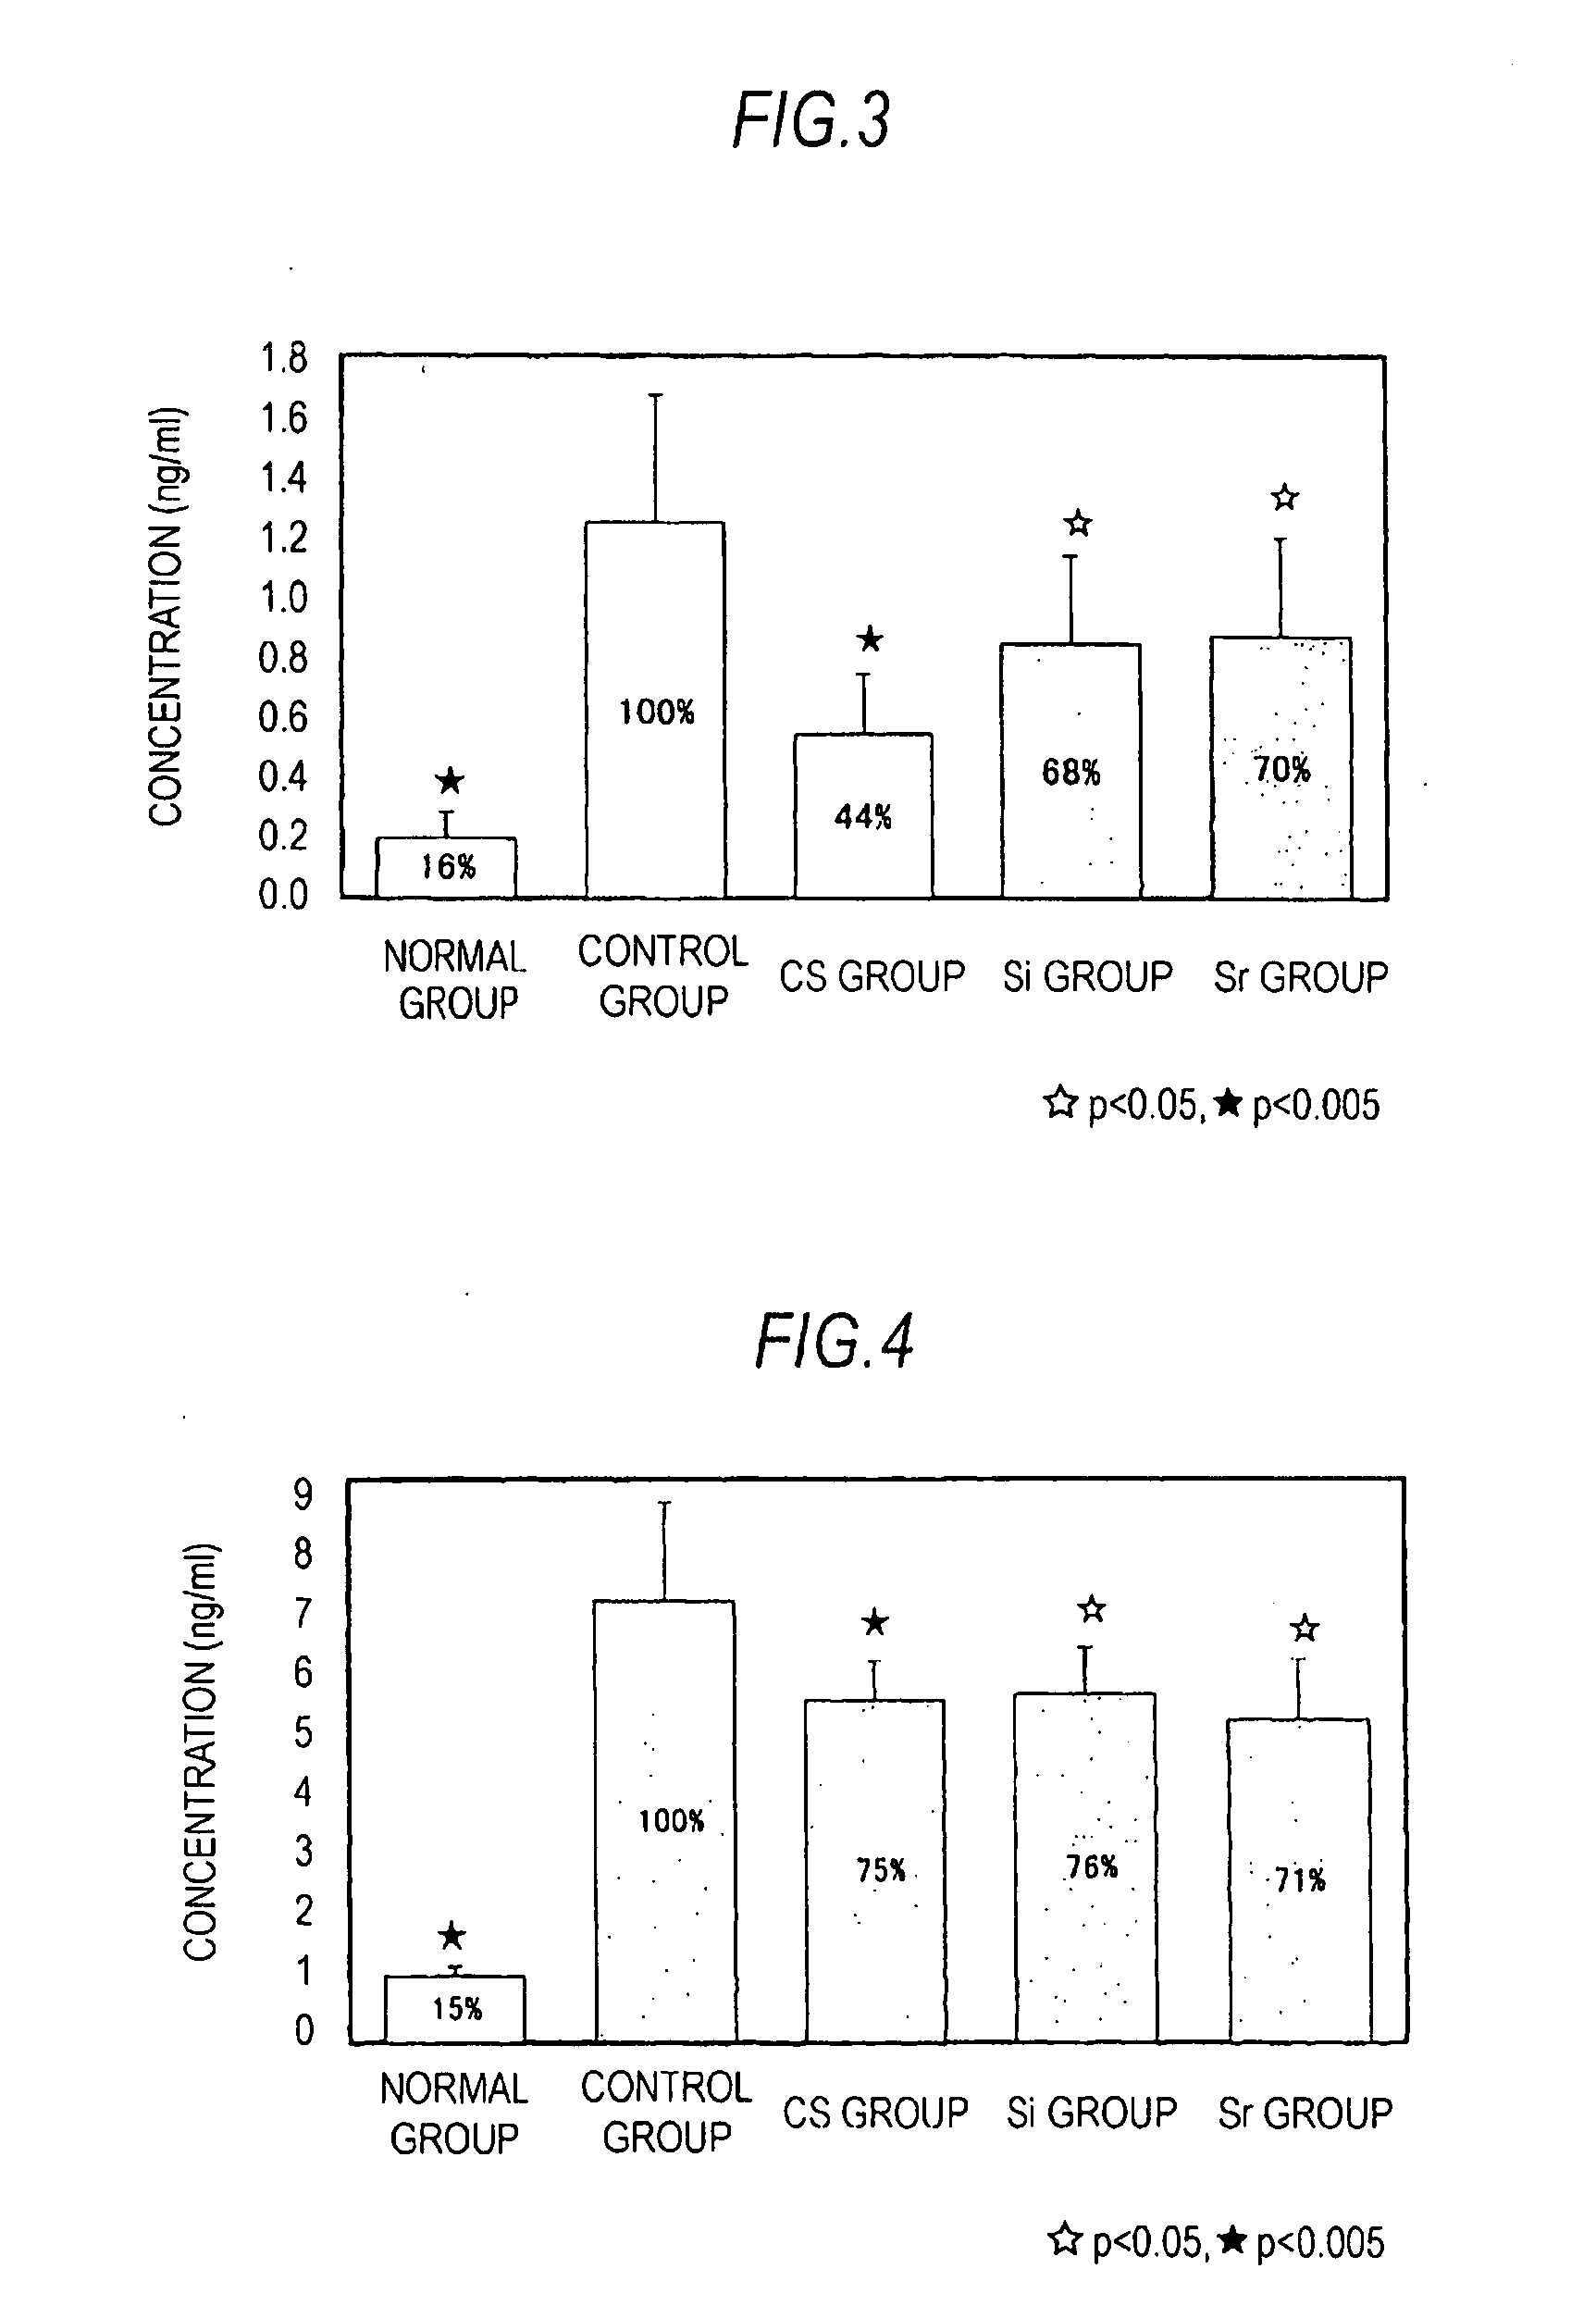 Agent for prevention or treatment of blood glucose level elevation